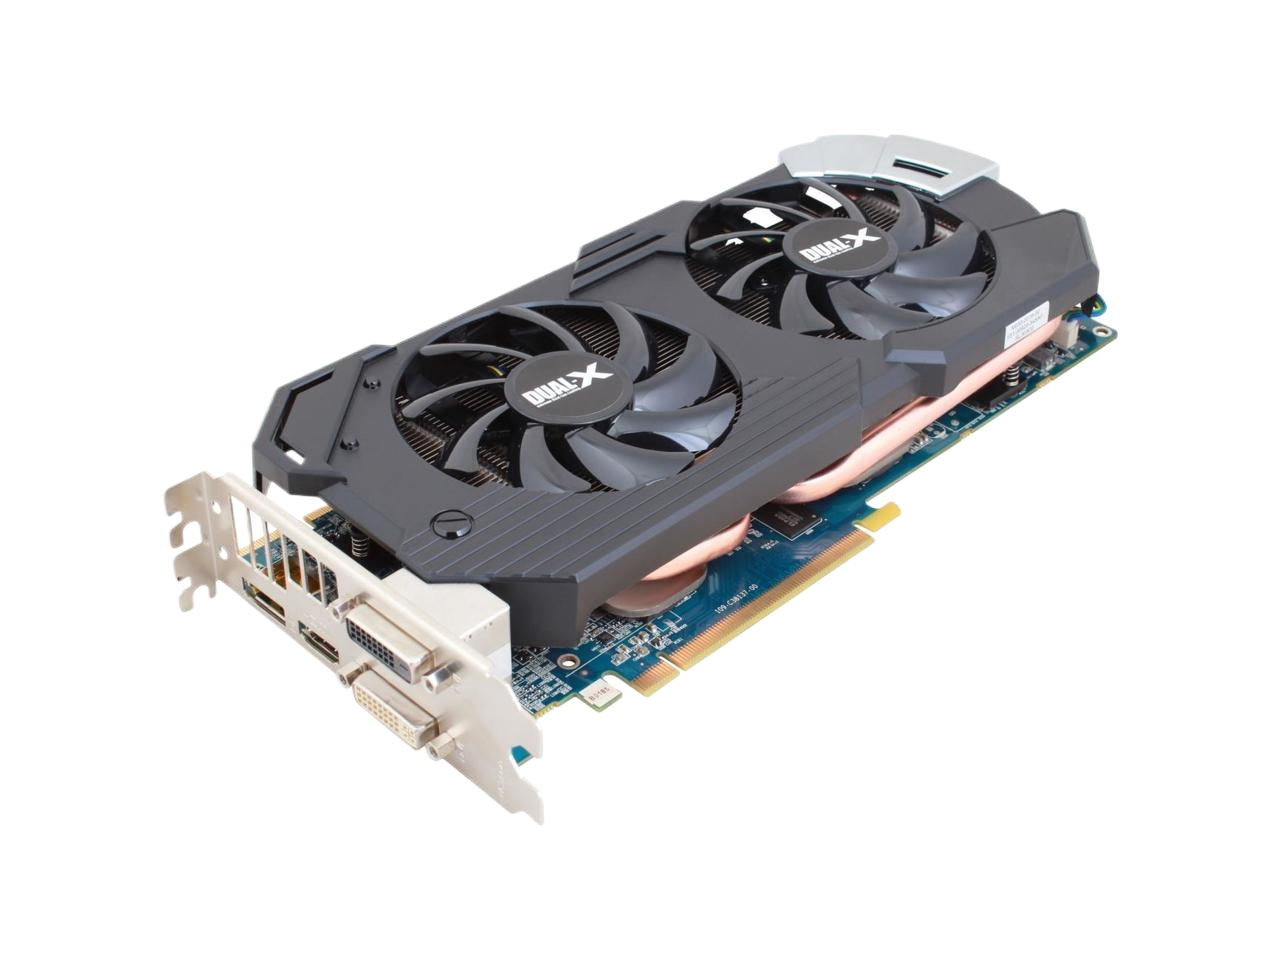 Sapphire Radeon HD 7950 850 MHz Core 3GB GDDR5 PCI Express 3.0 x16 Dual Slot Space Required Video Graphic Card